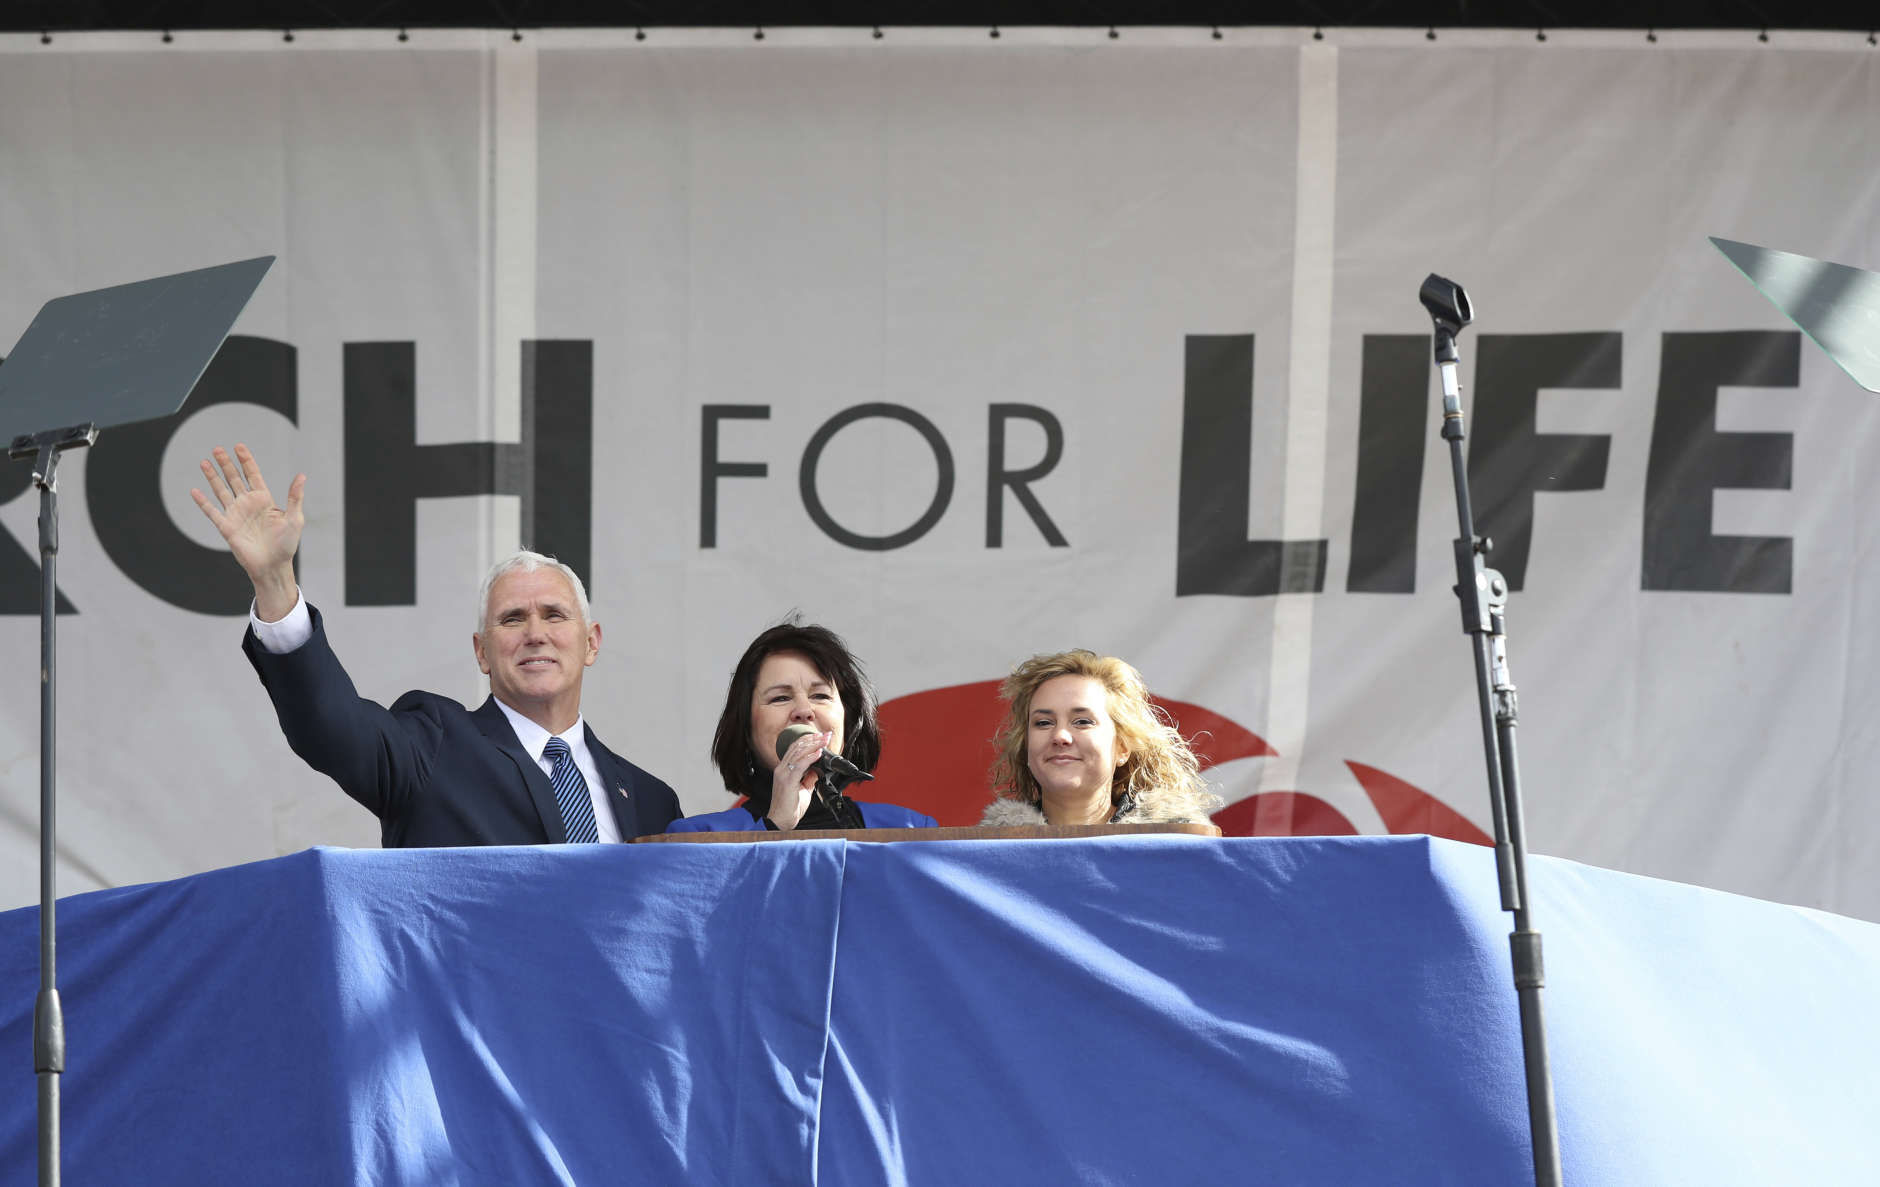 Vice President Mike Pence, left, with his wife Karen Pence, center, wave to the crowd at the March for Life on the National Mall in Washington, Friday, Jan. 27, 2017. (AP Photo/Manuel Balce Ceneta)